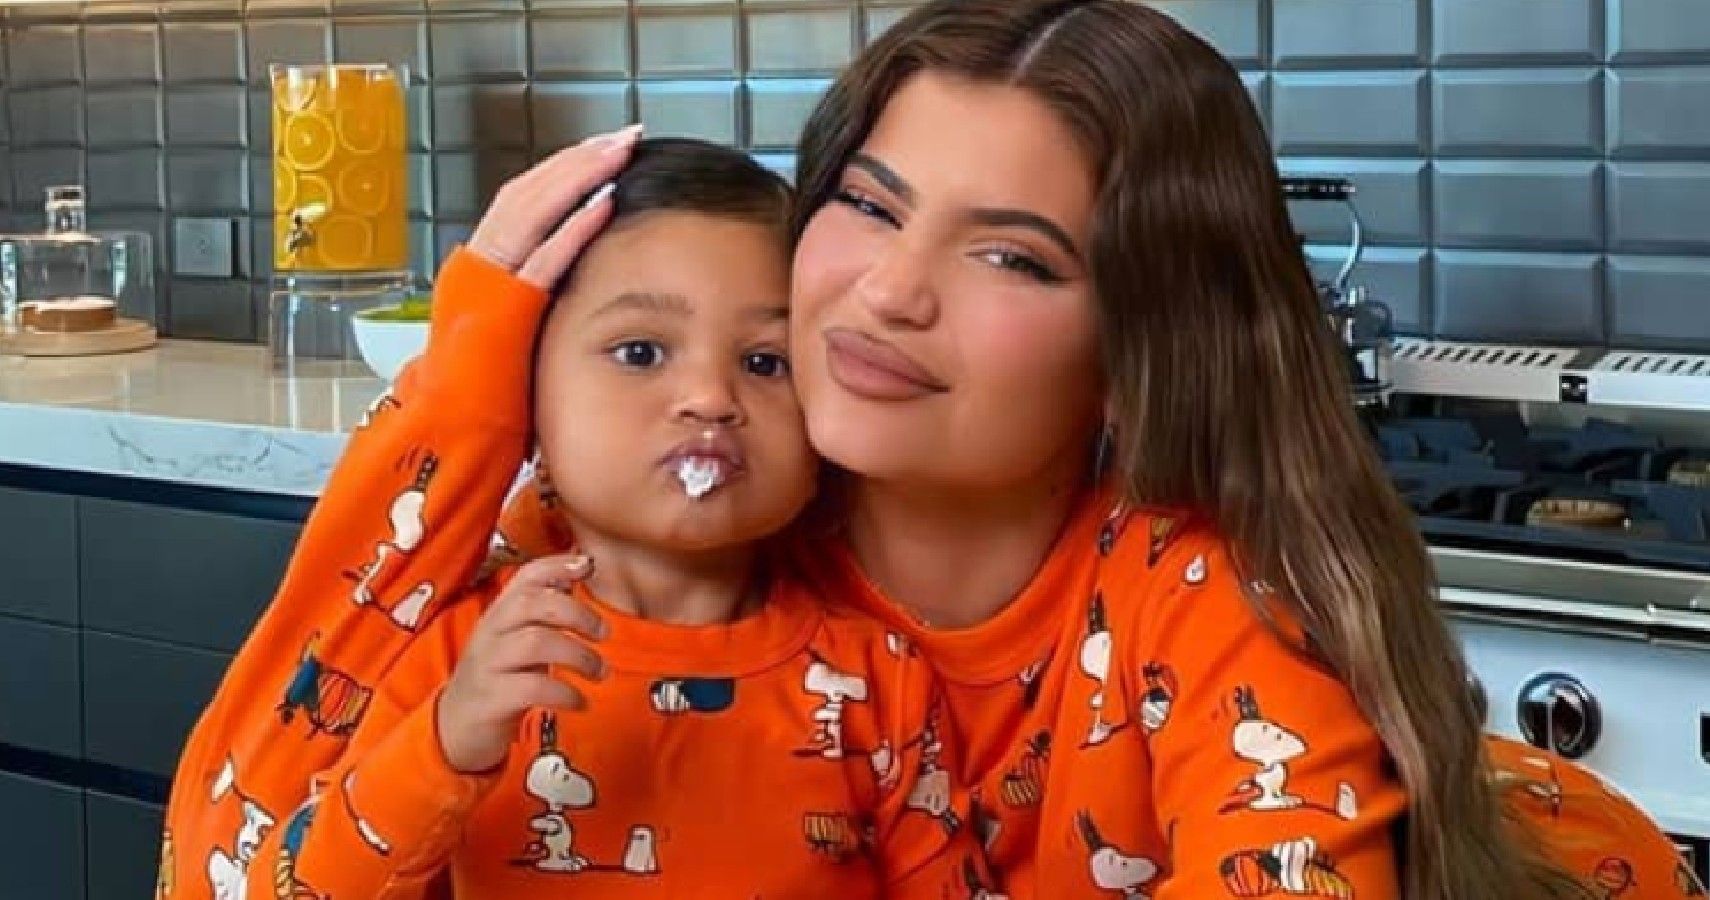 Kylie Jenner Teaches Stormi To Ride A Scooter In Sweet Update